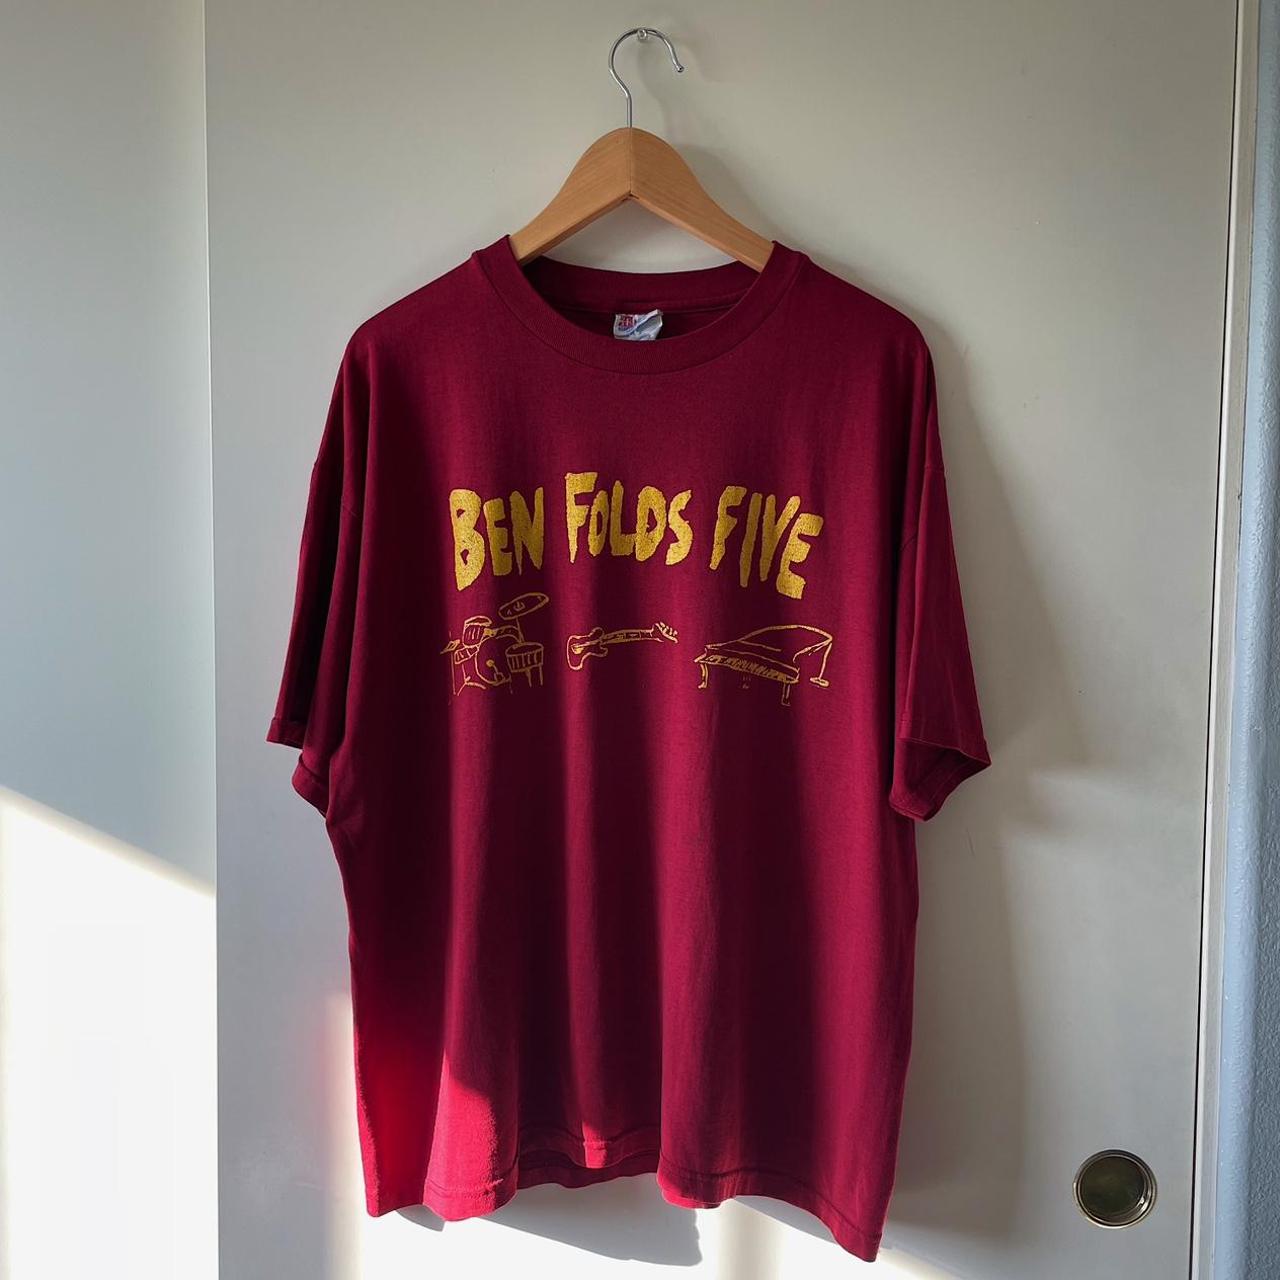 Made in Mexico Ben Folds Five band shirt, Shirt is a...